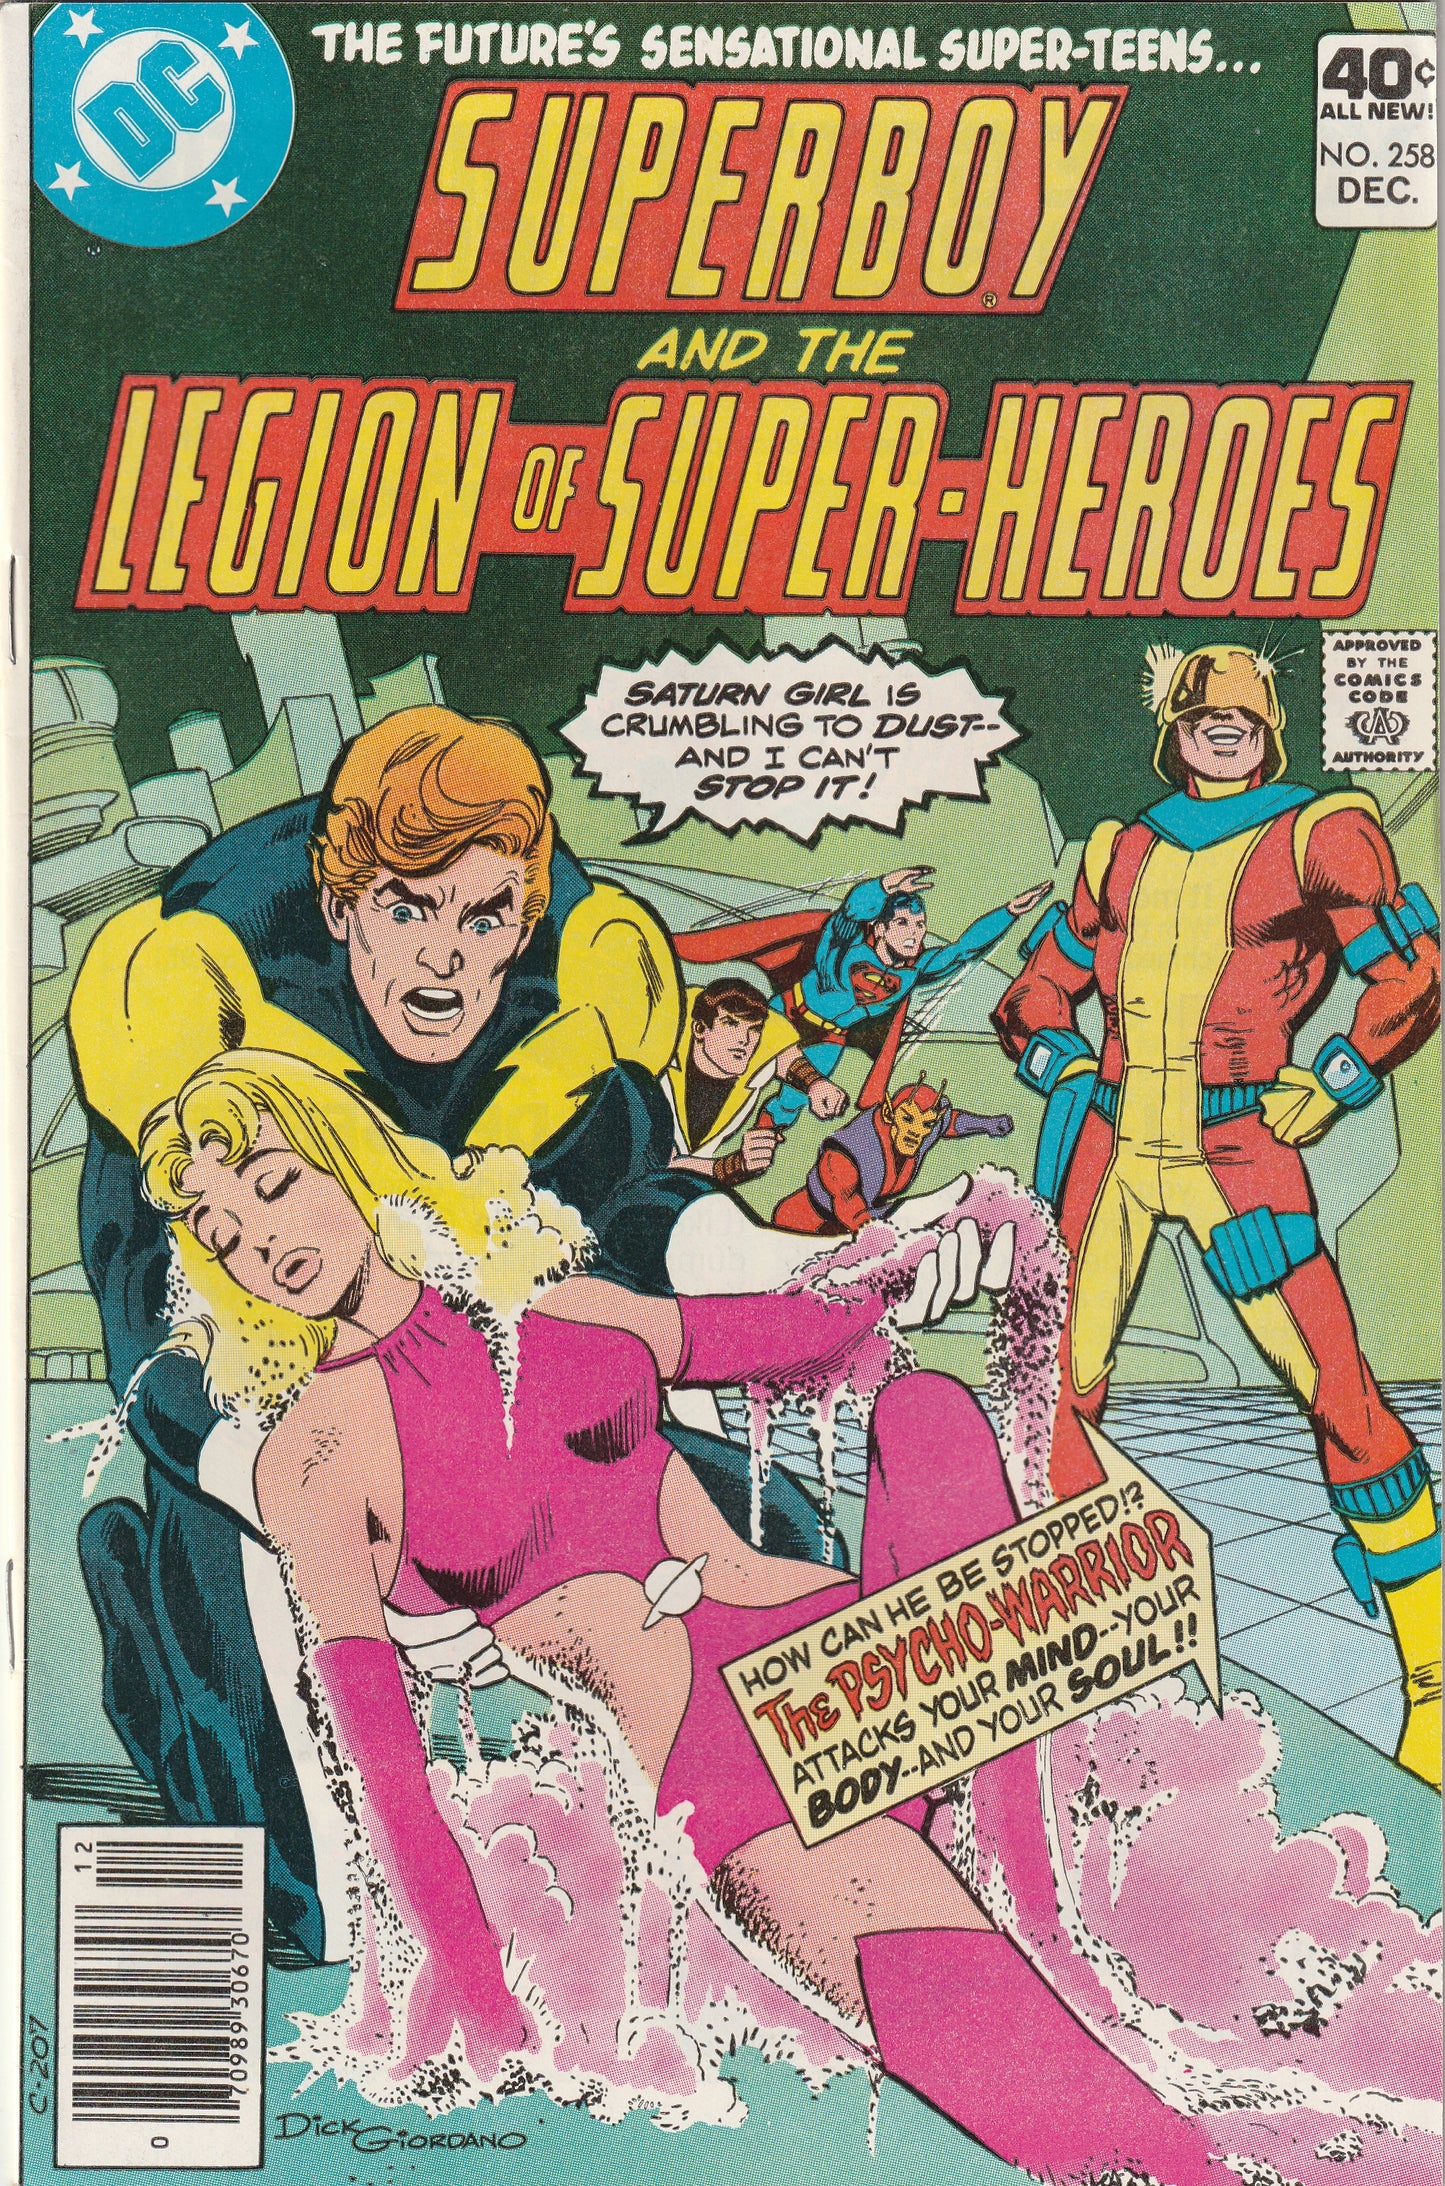 Superboy and the Legion of Super-Heroes #258 (1979) - Final issue of series